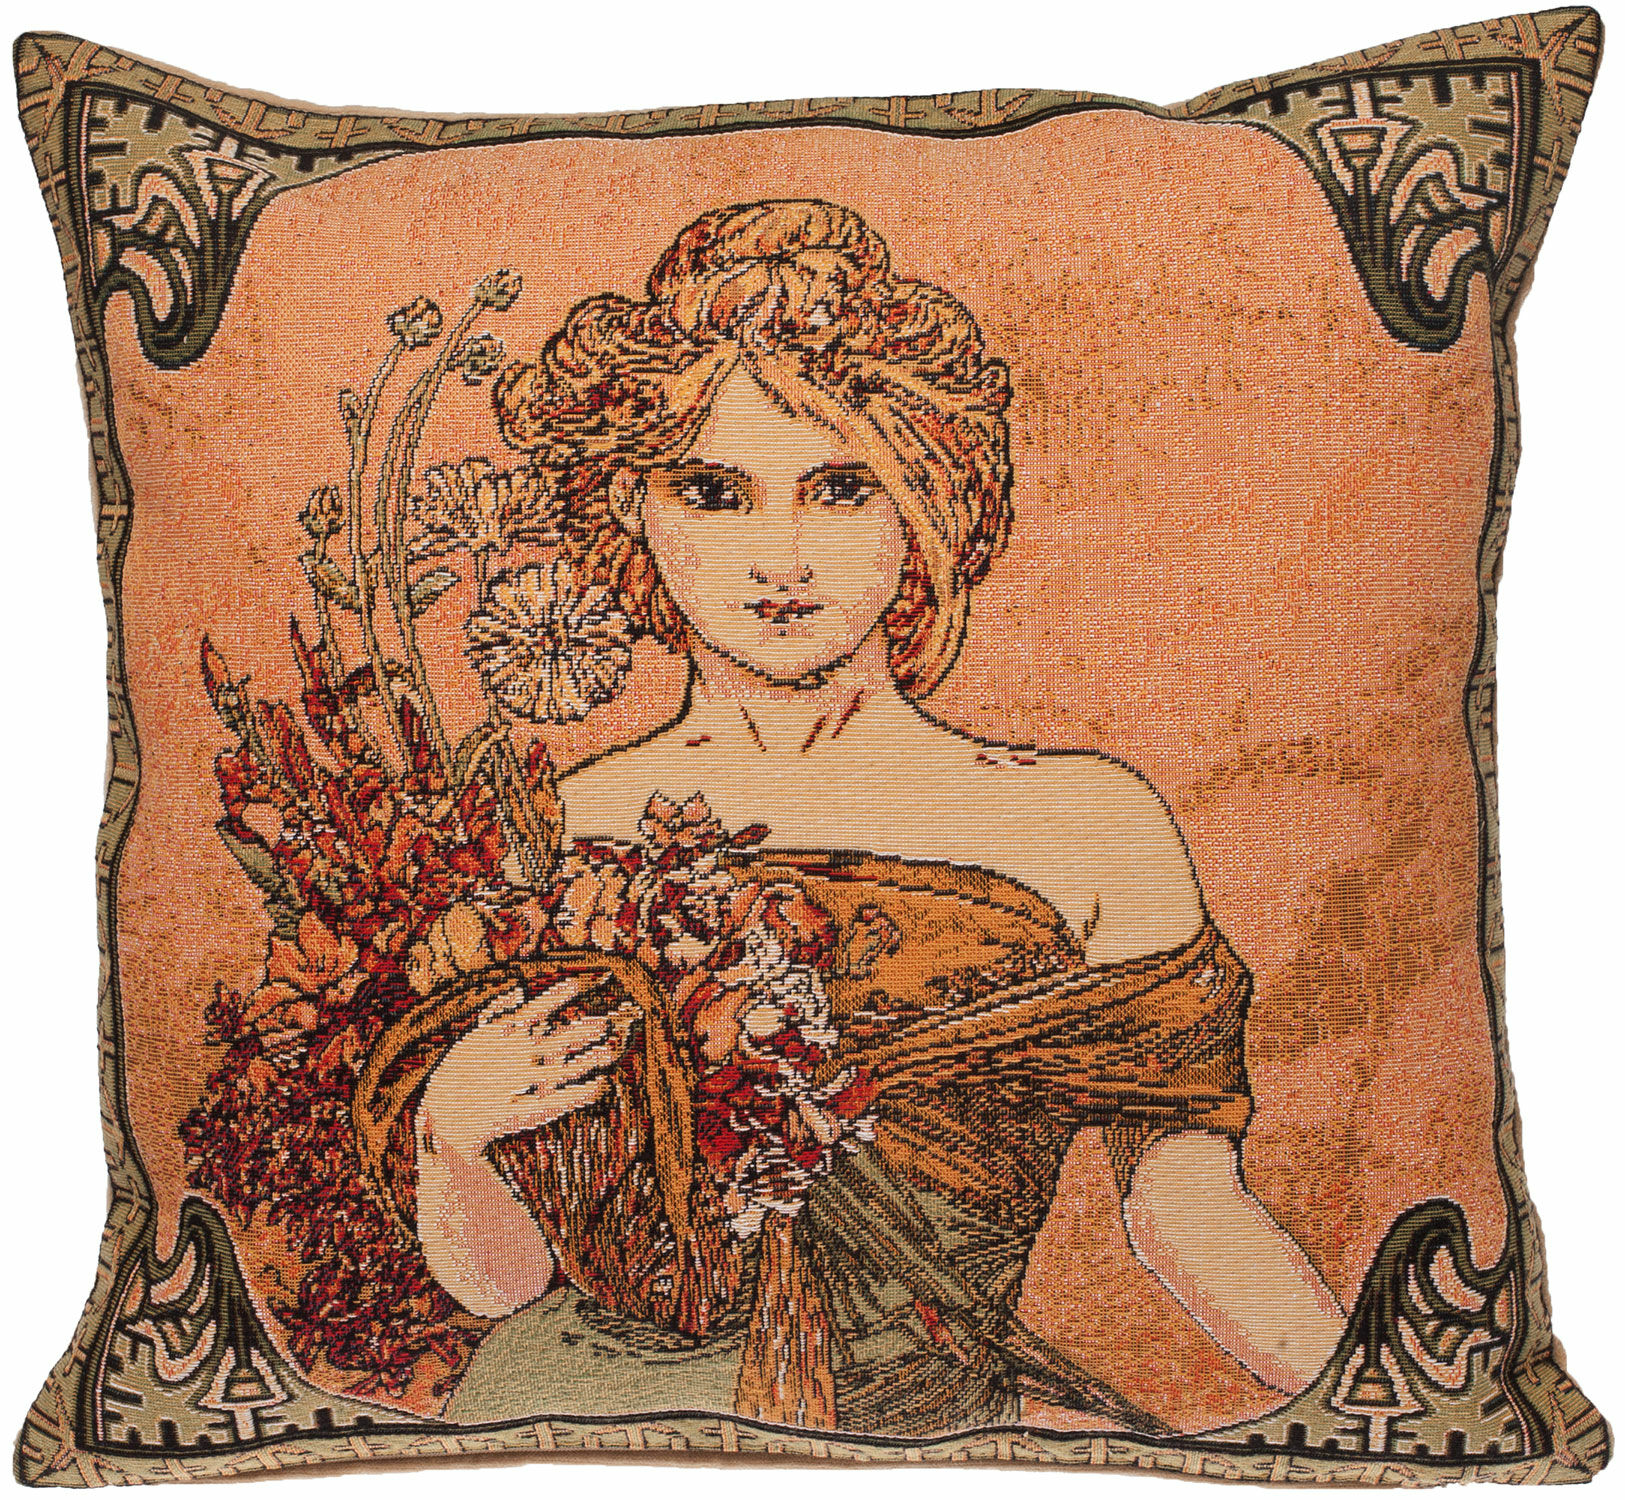 Cushion cover "Spring" by Alphonse Mucha